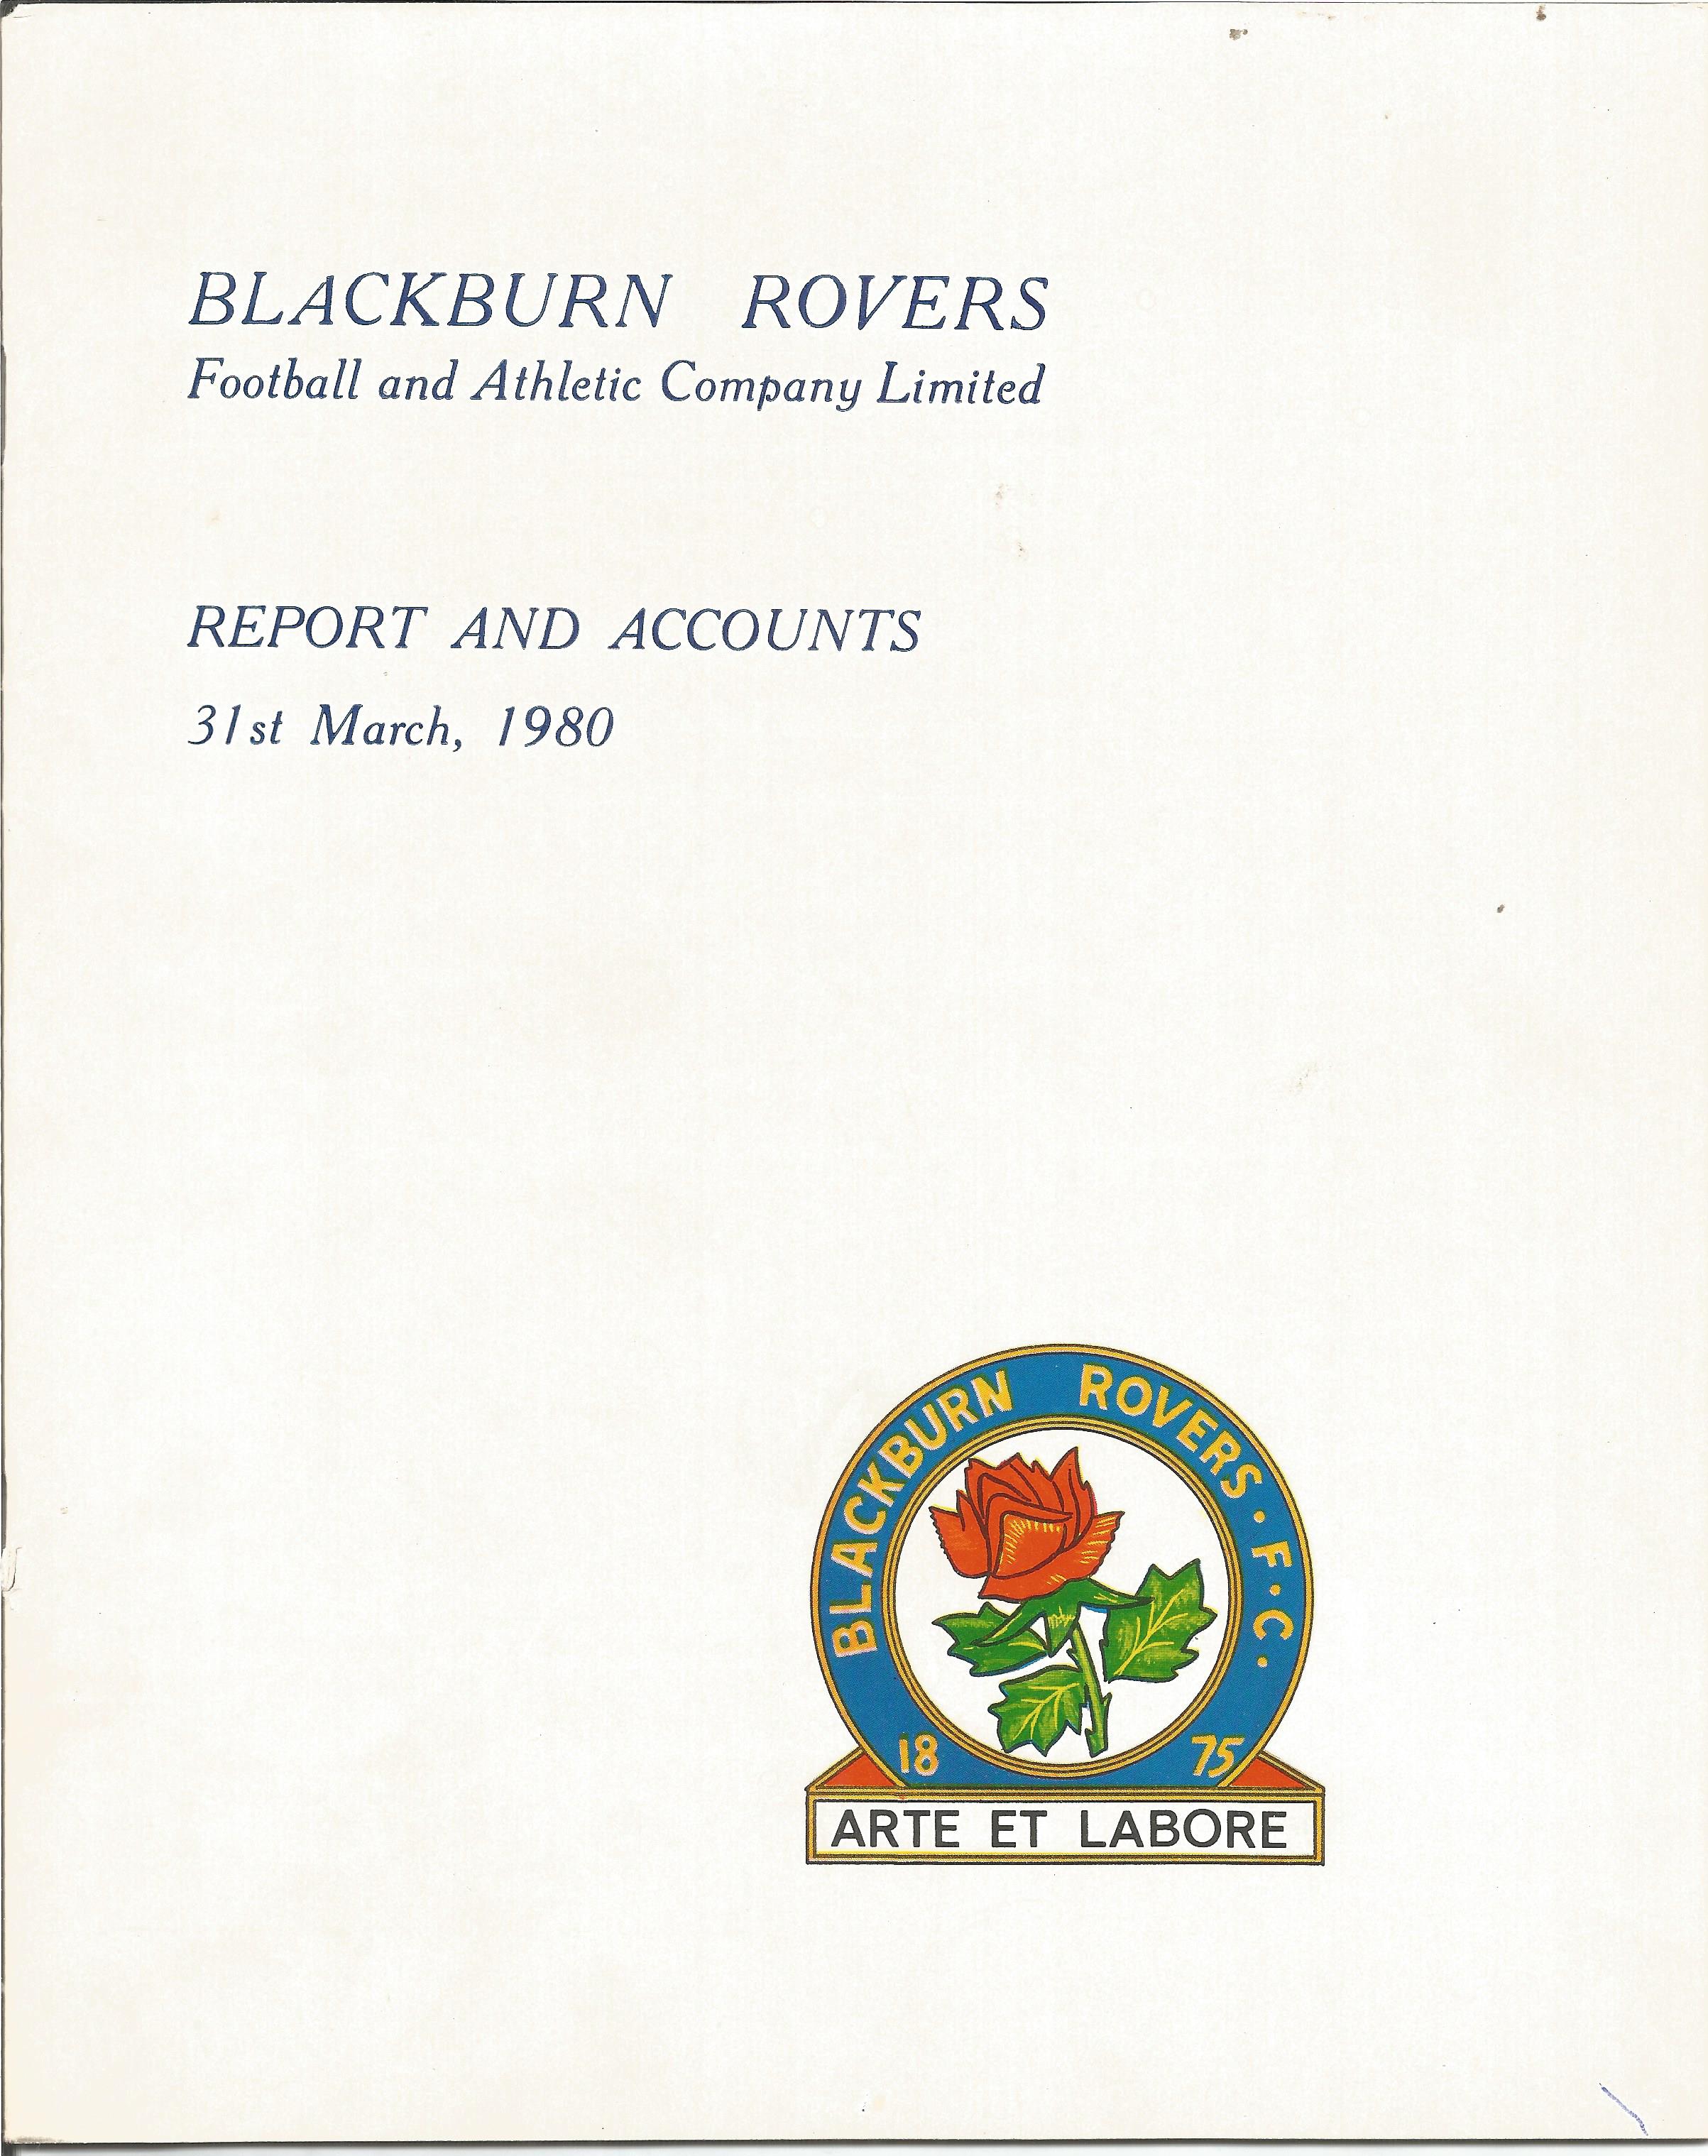 Football Blackburn Rovers report and accounts booklet 31st March 1980. Good Condition. All